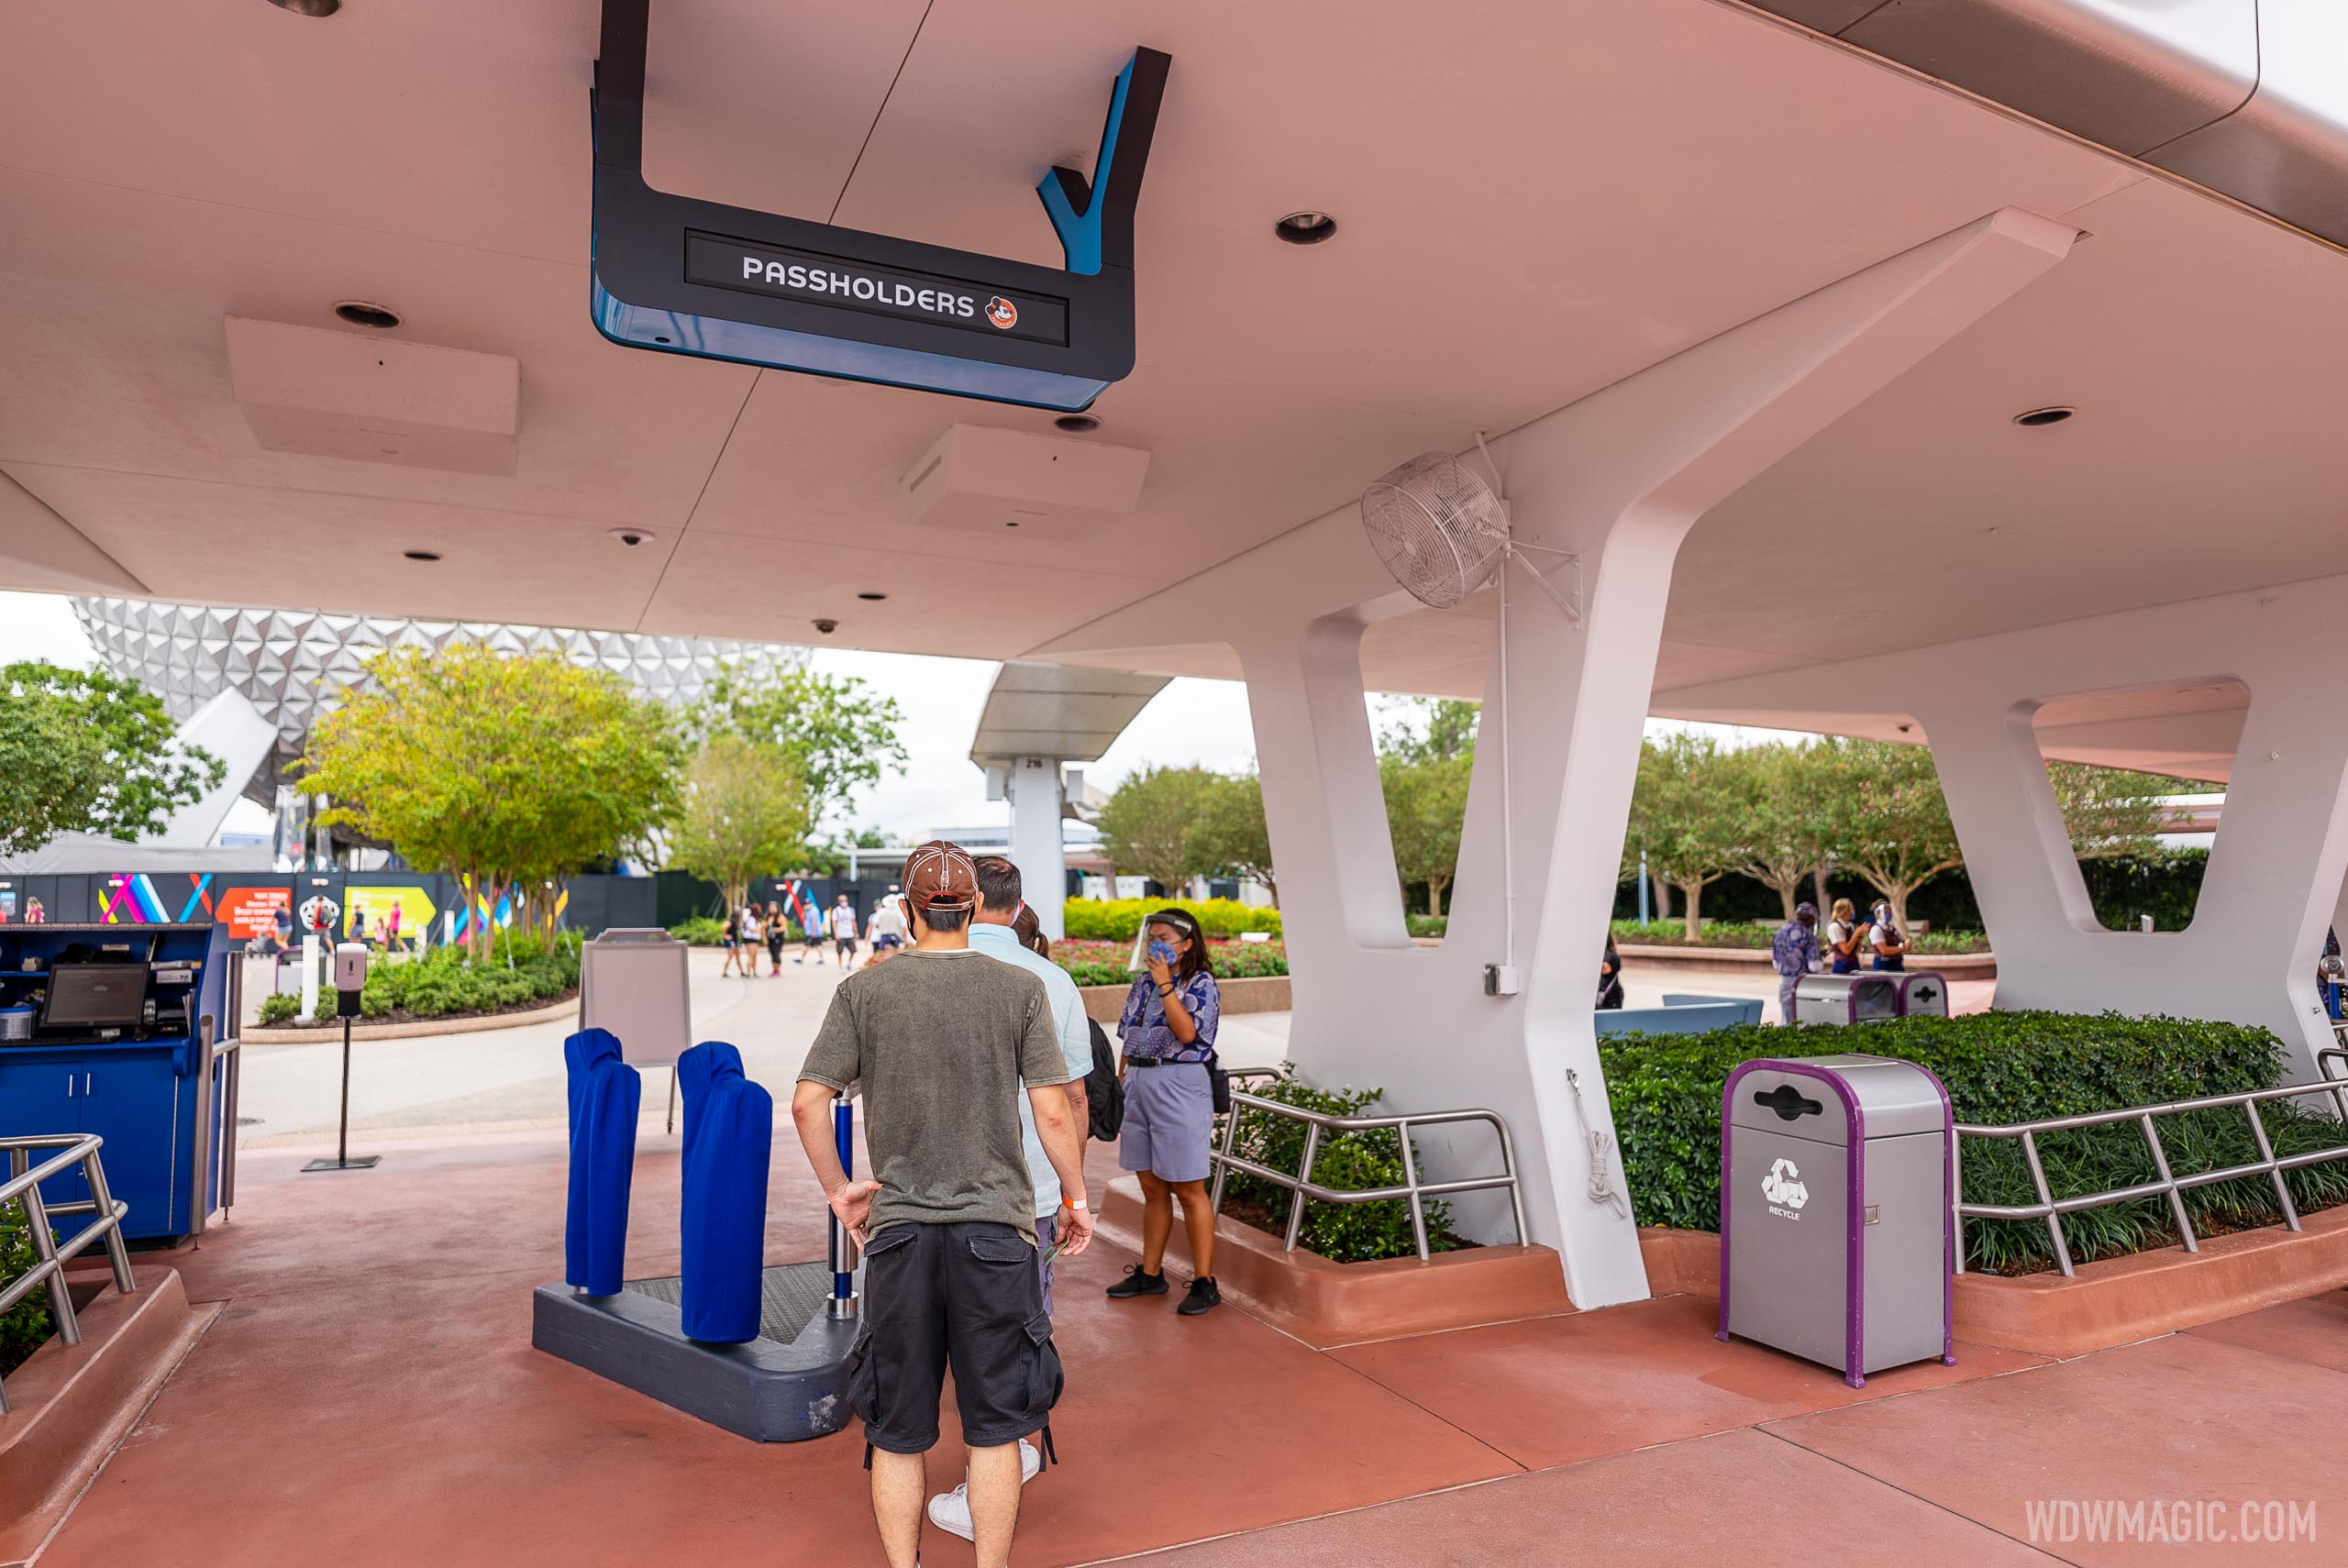 EPCOT's new tapstyle entrance signs